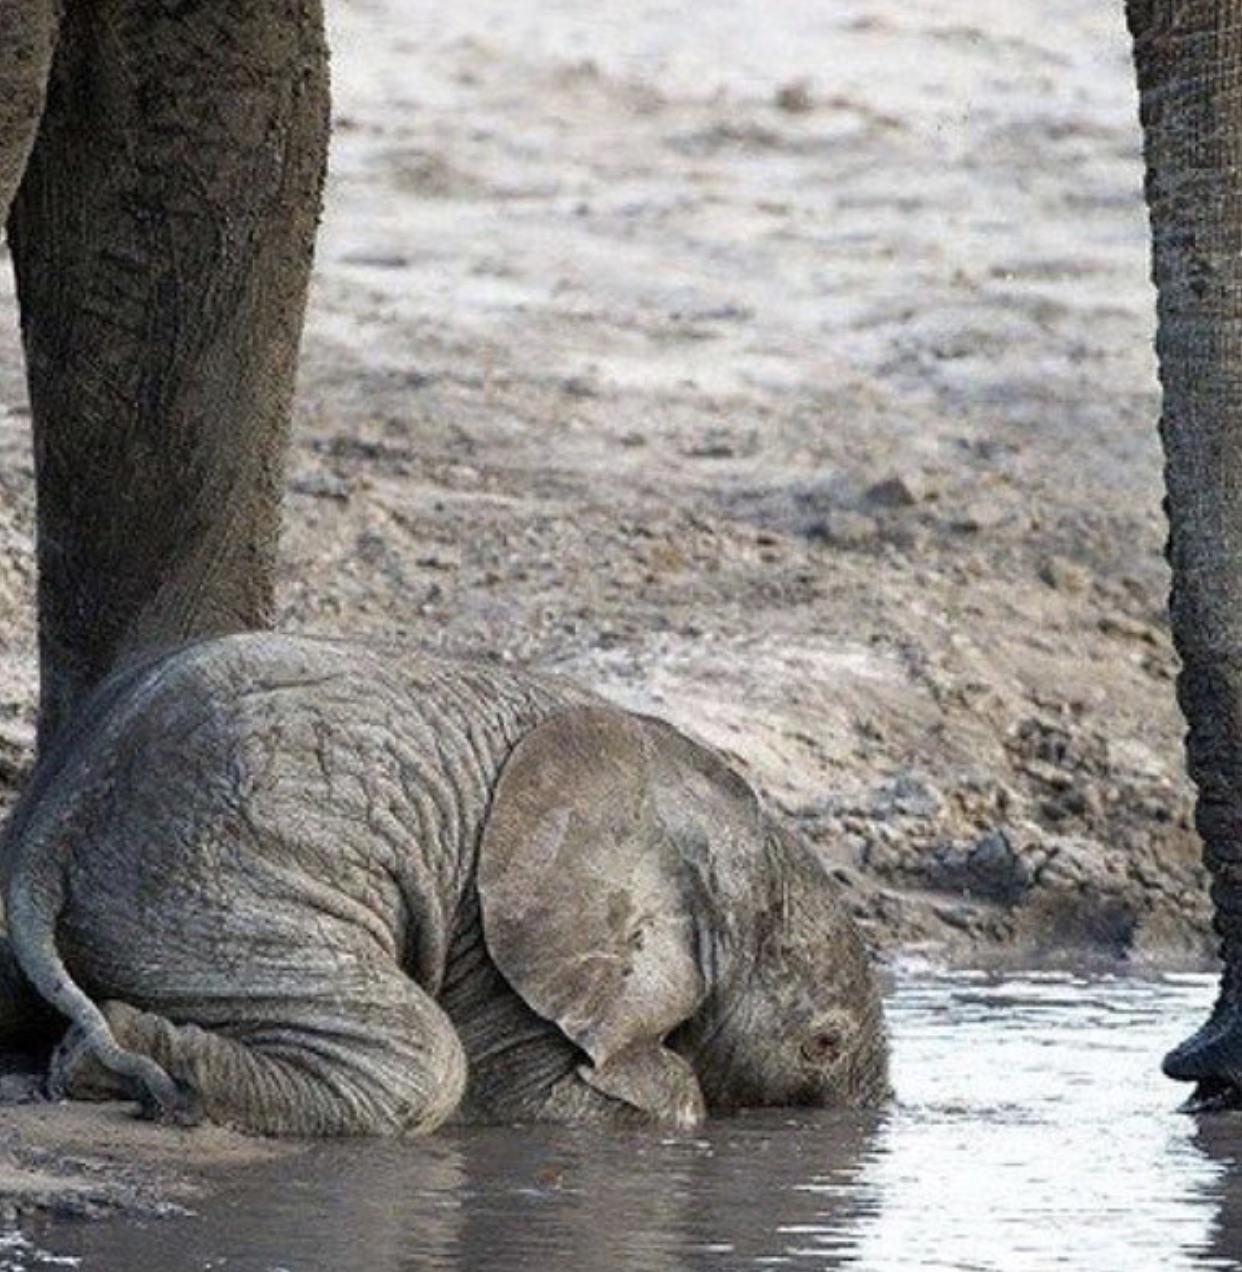 Young elephants don't know how to use their trunks till around 10 months old.